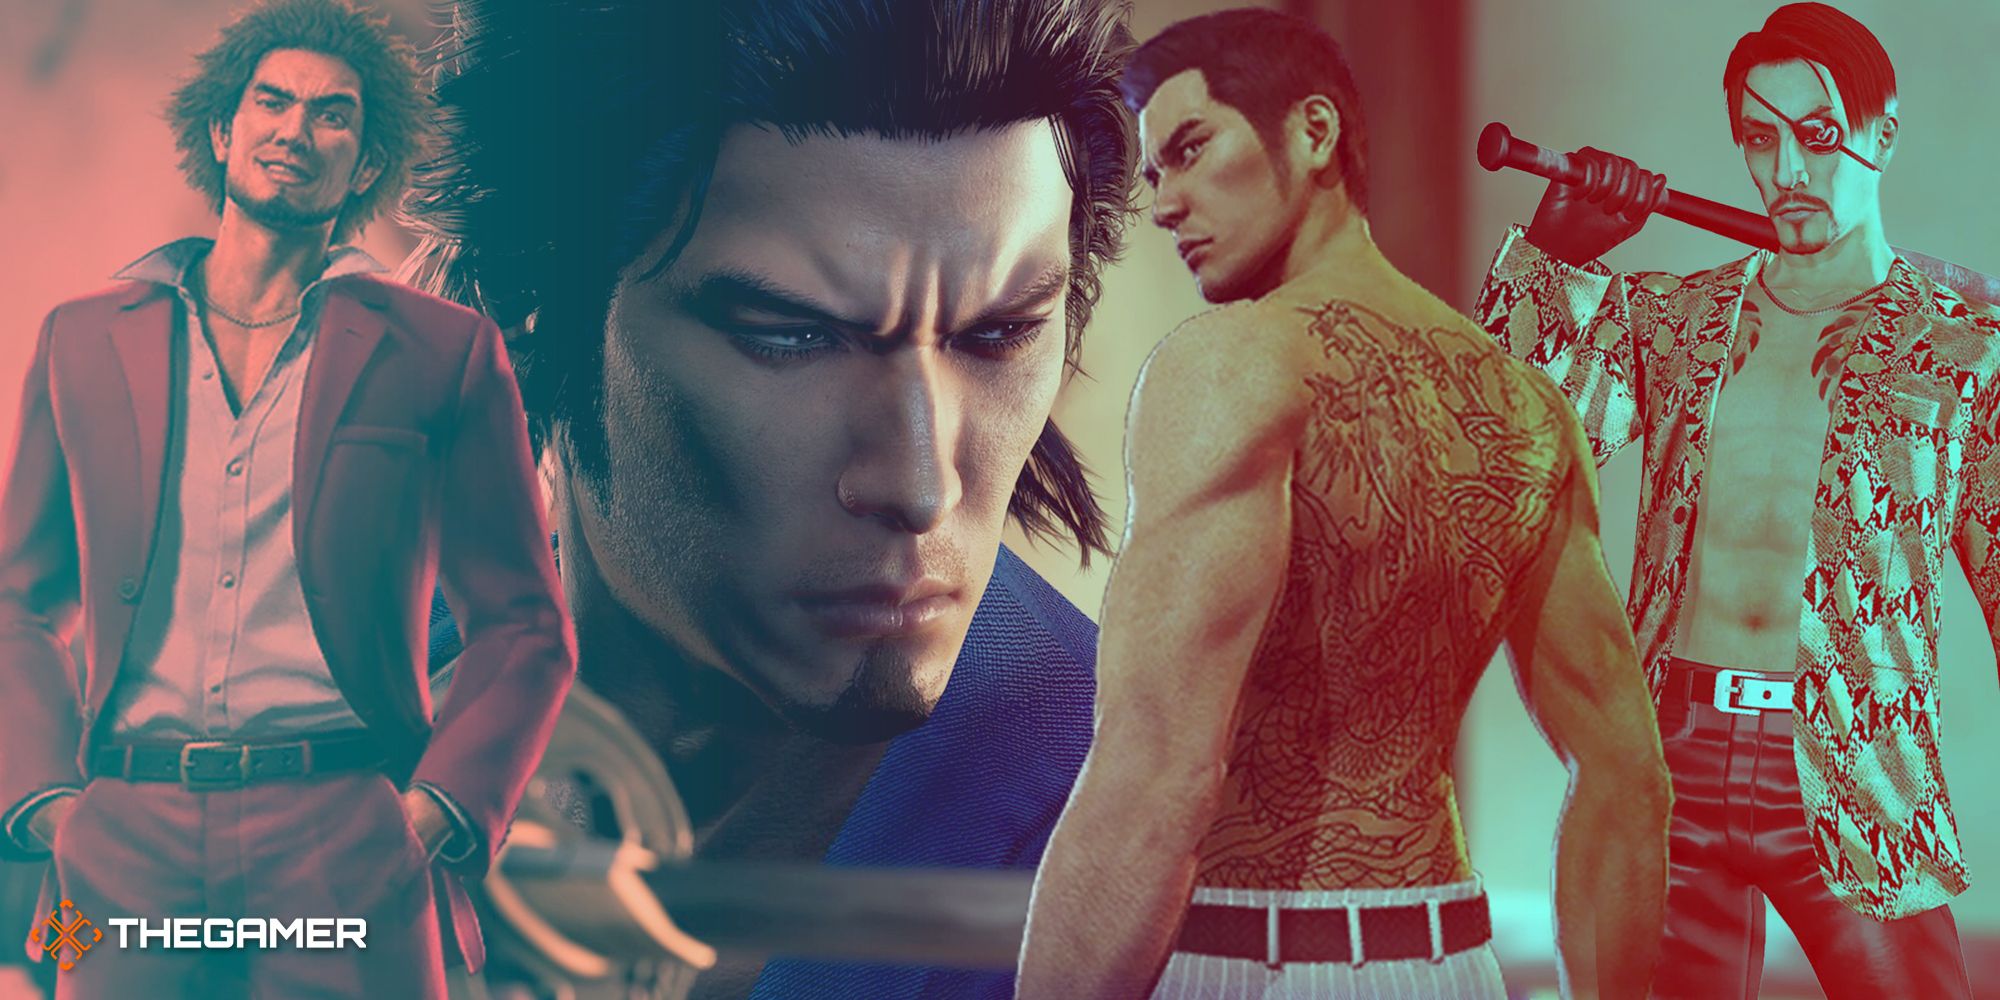 What are your top 5 Yakuza games? Also yes I rank Kiwami 2 as 3rd